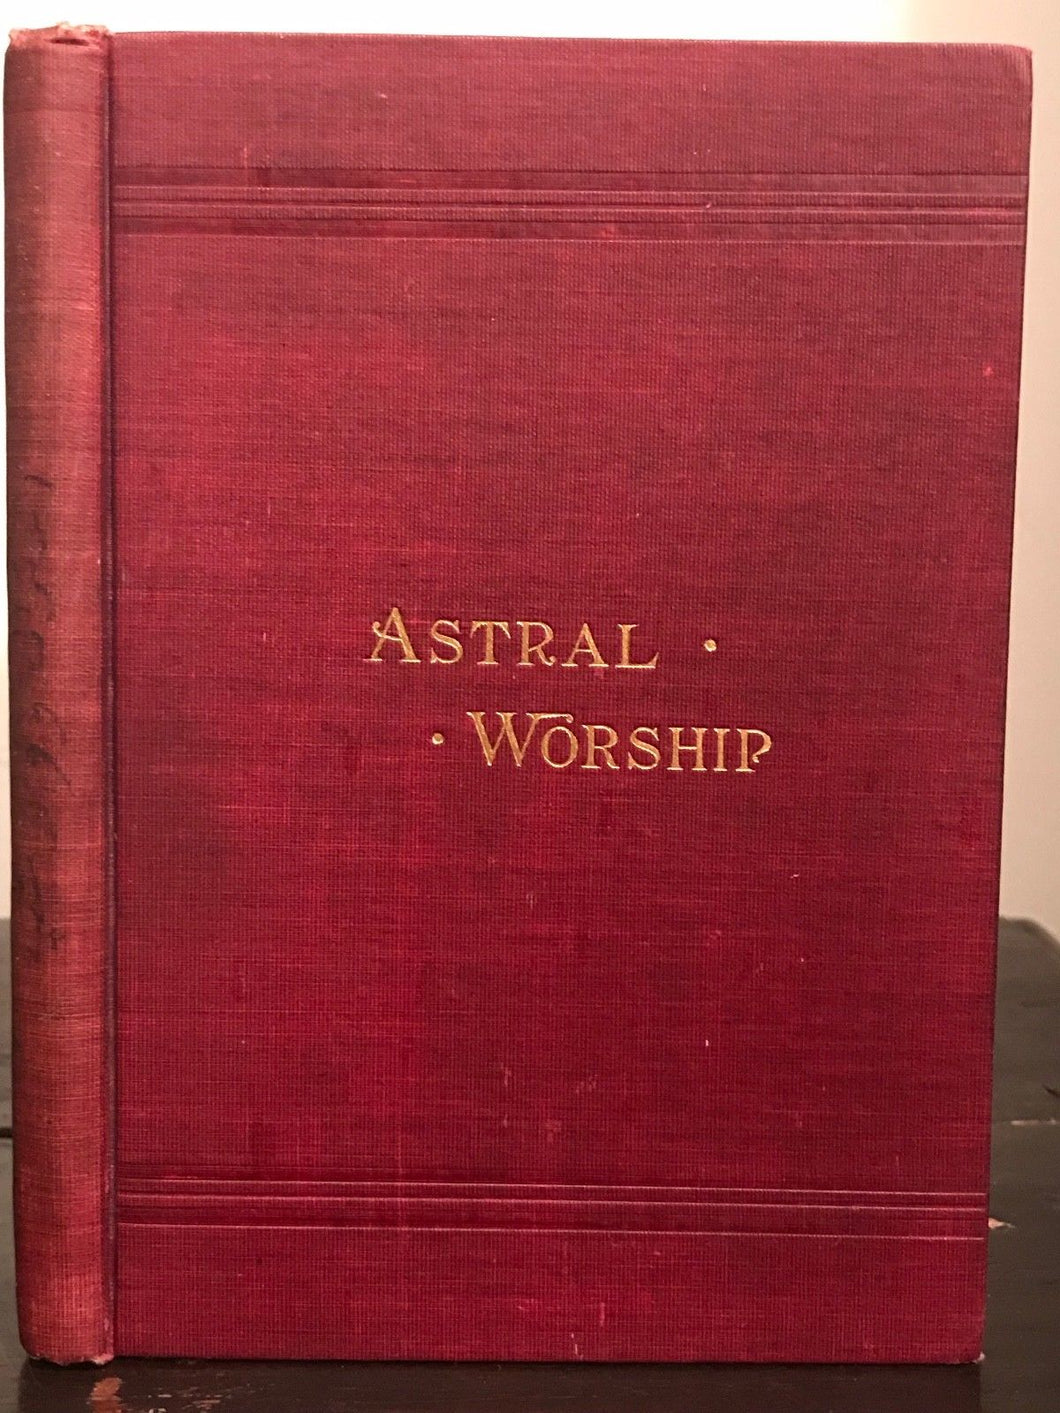 1895 - ASTRAL WORSHIP - J.H. HILL, 1st/1st - Symbolic Astrology, Occult - RARE